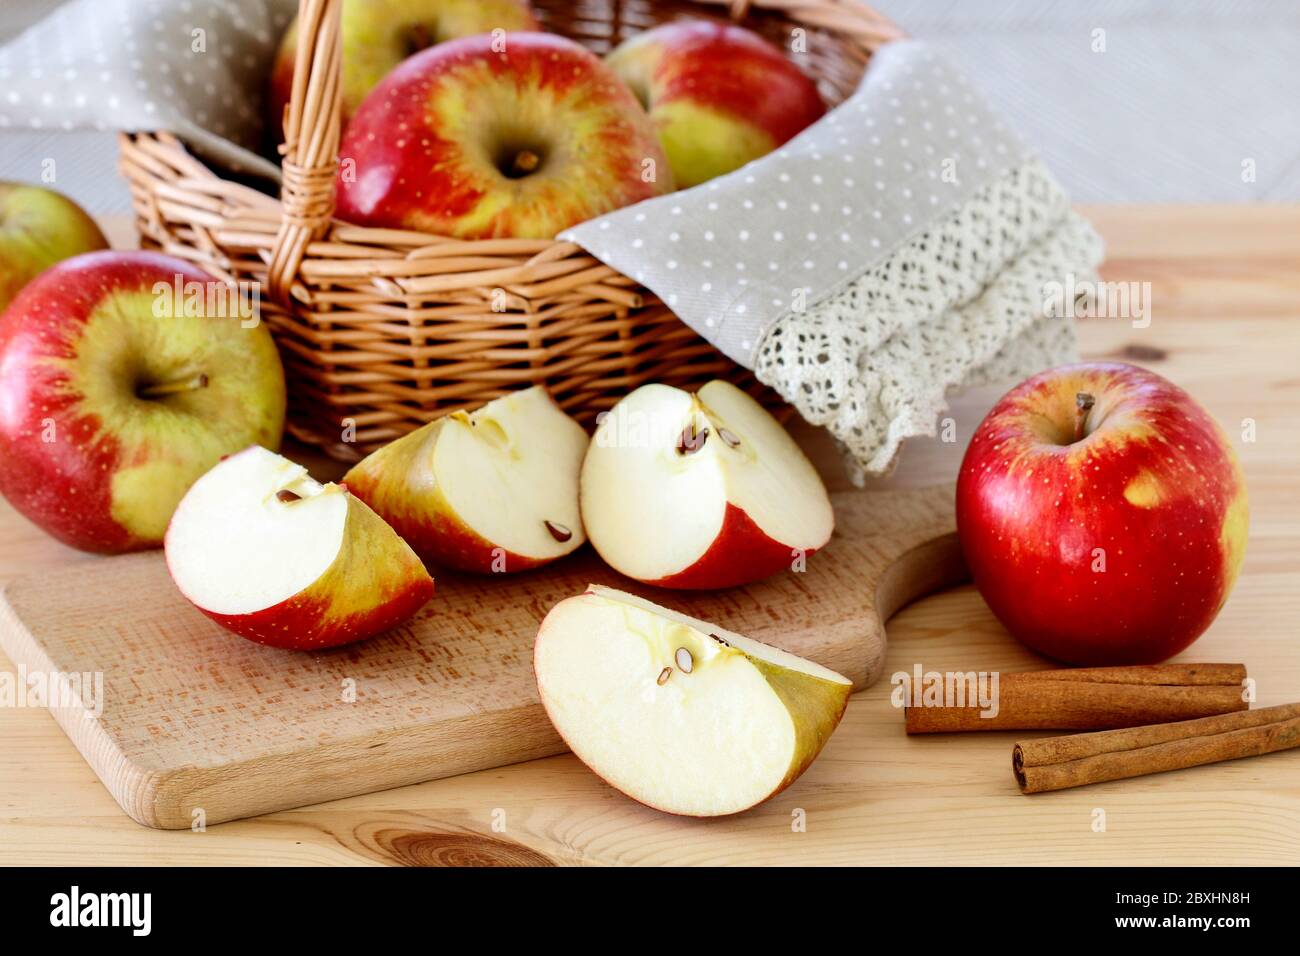 Basket with apples on wooden table, copy space. Stock Photo